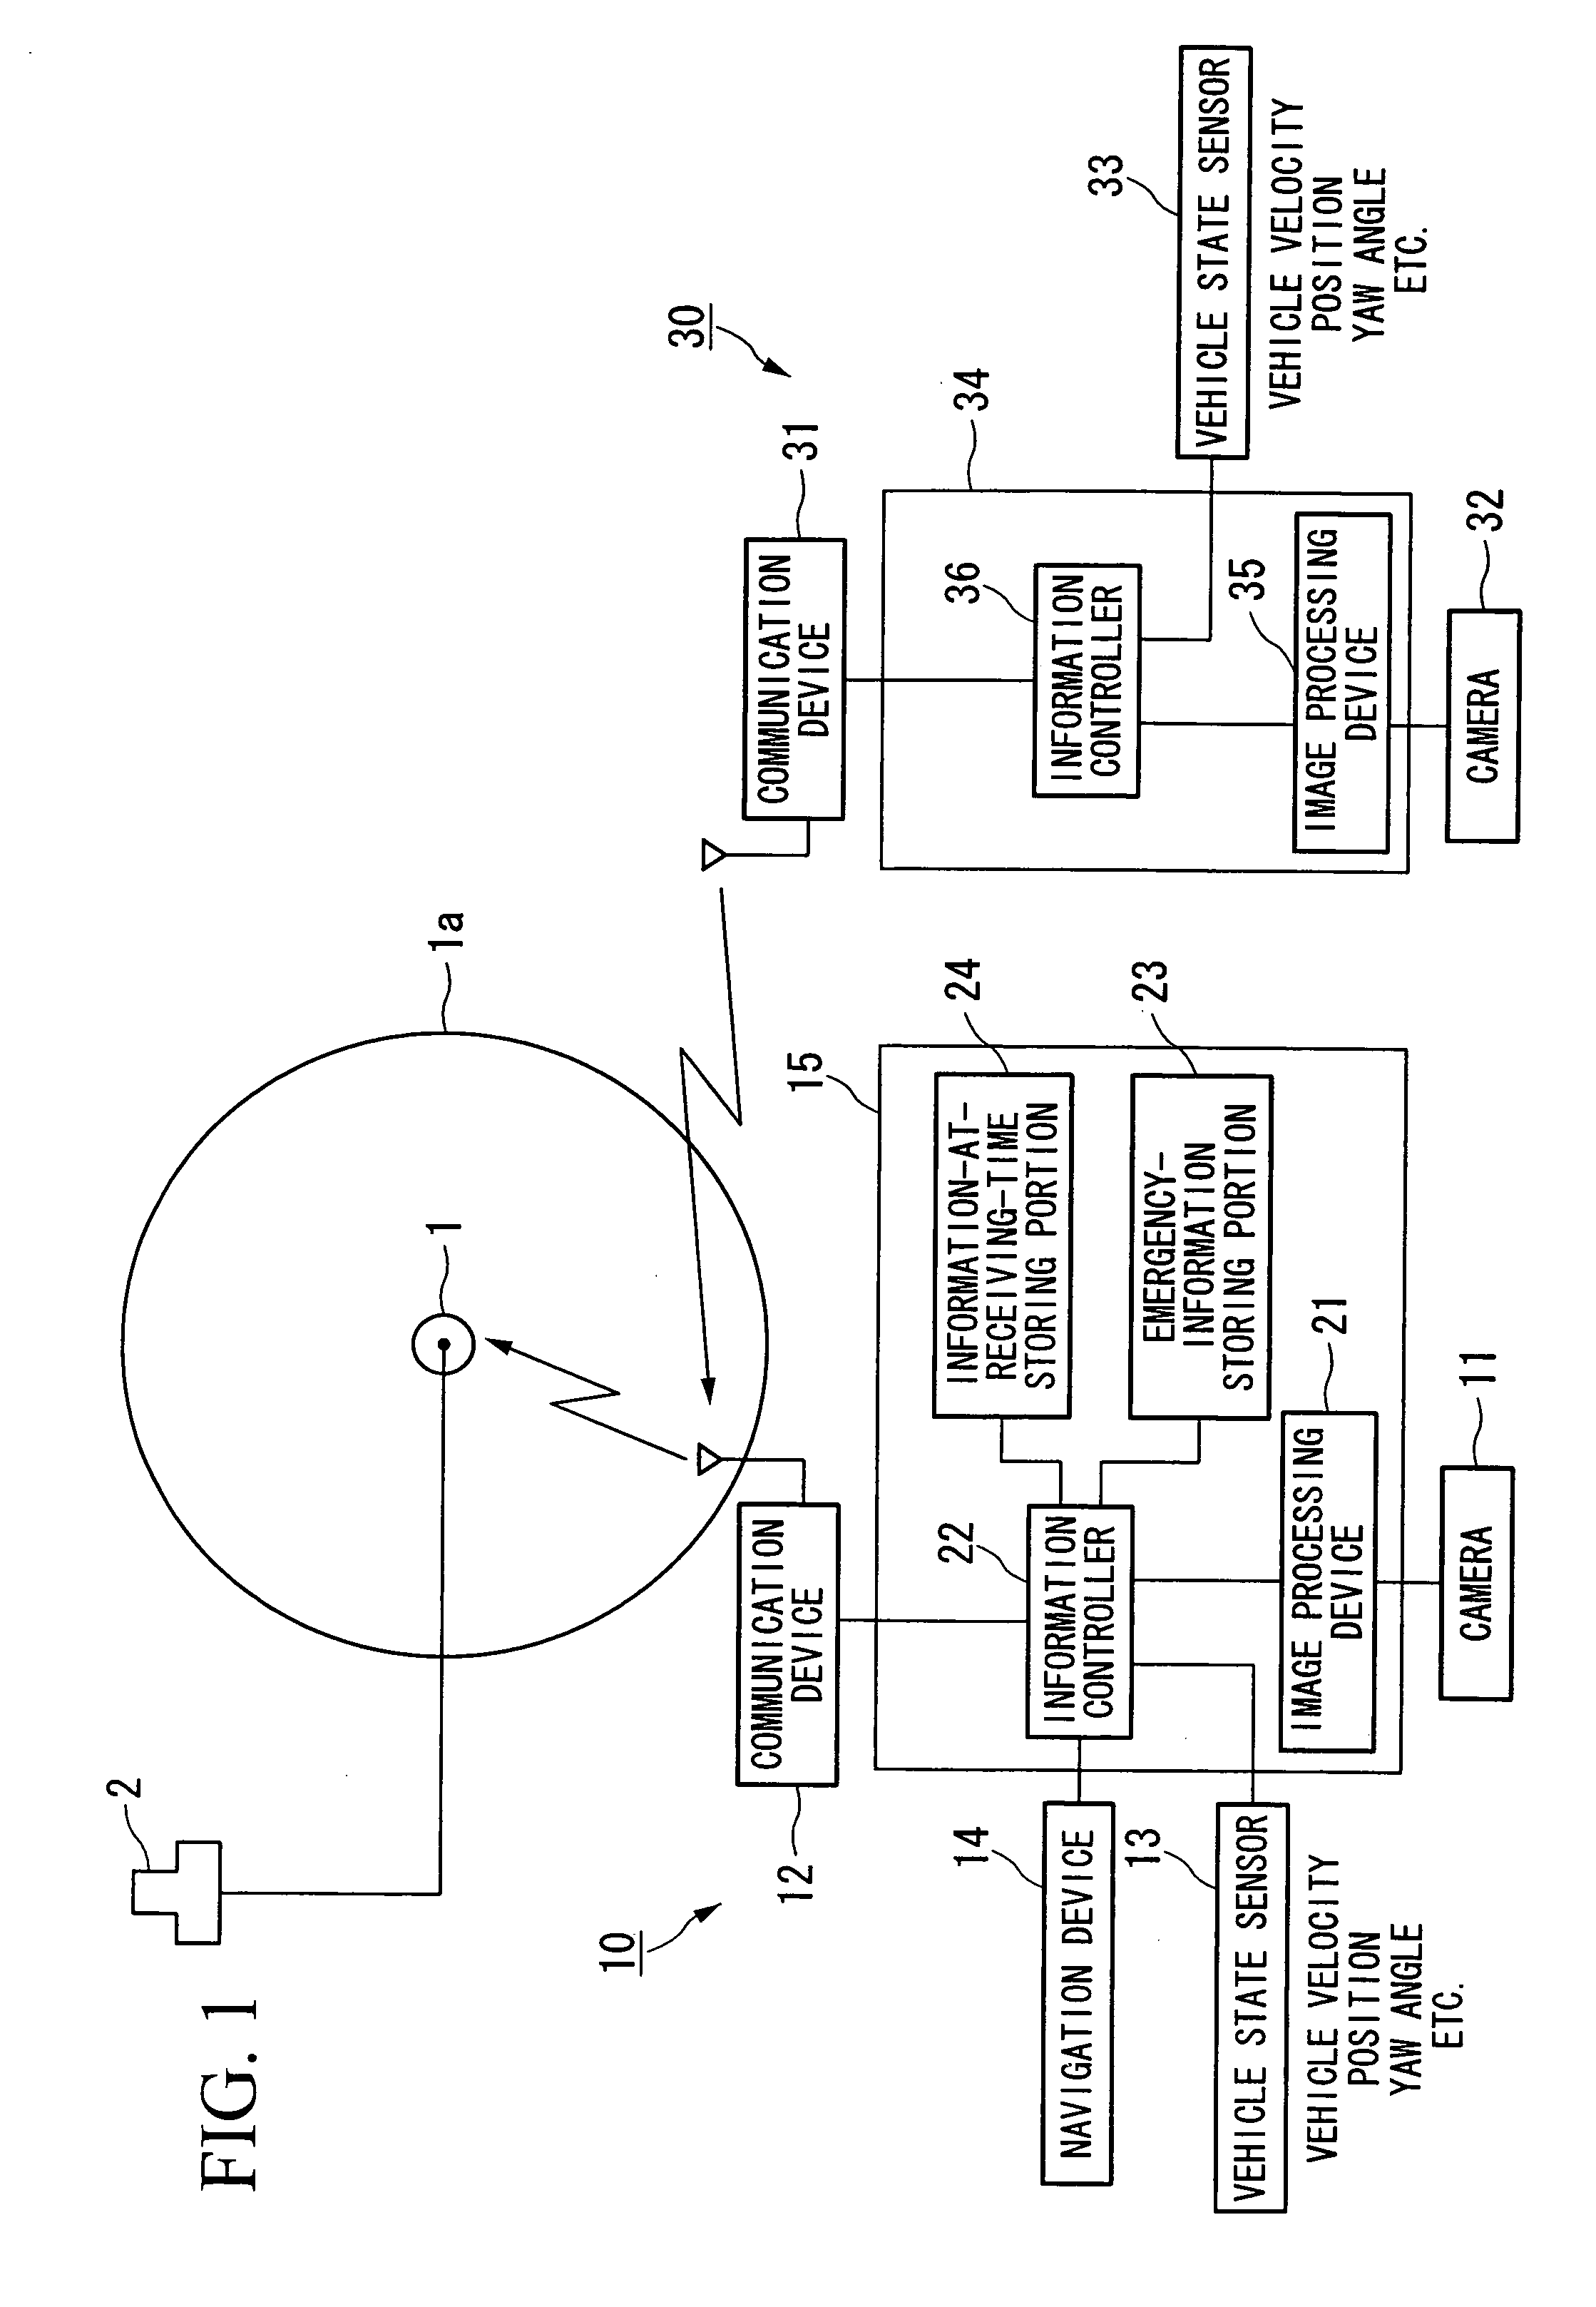 Emergency notification apparatus for vehicle